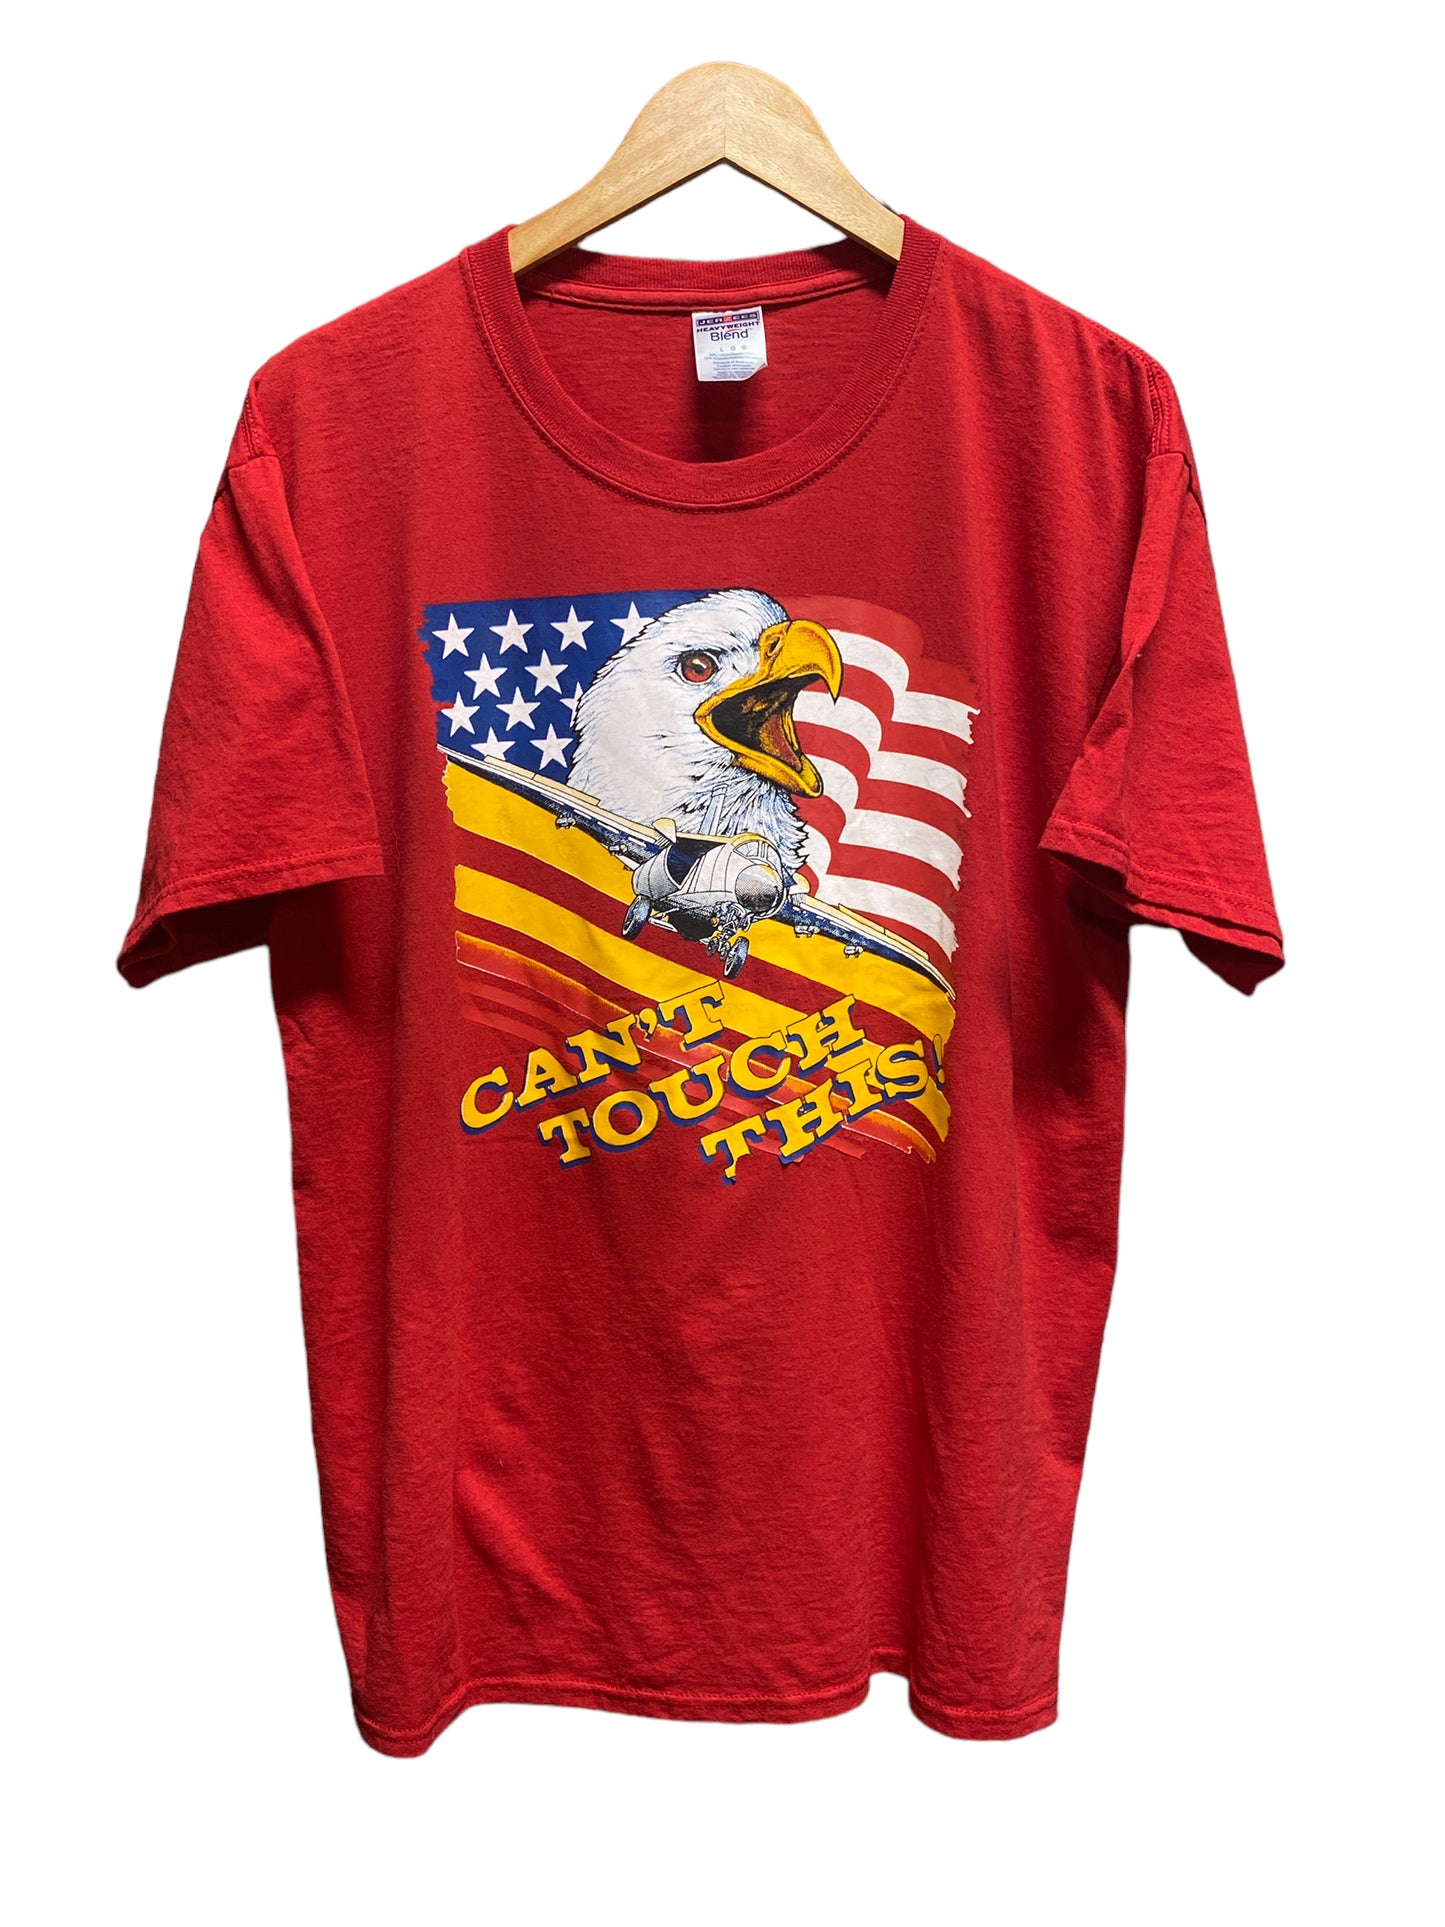 00's Cant Touch This America Eagle Graphic Tee Size Large